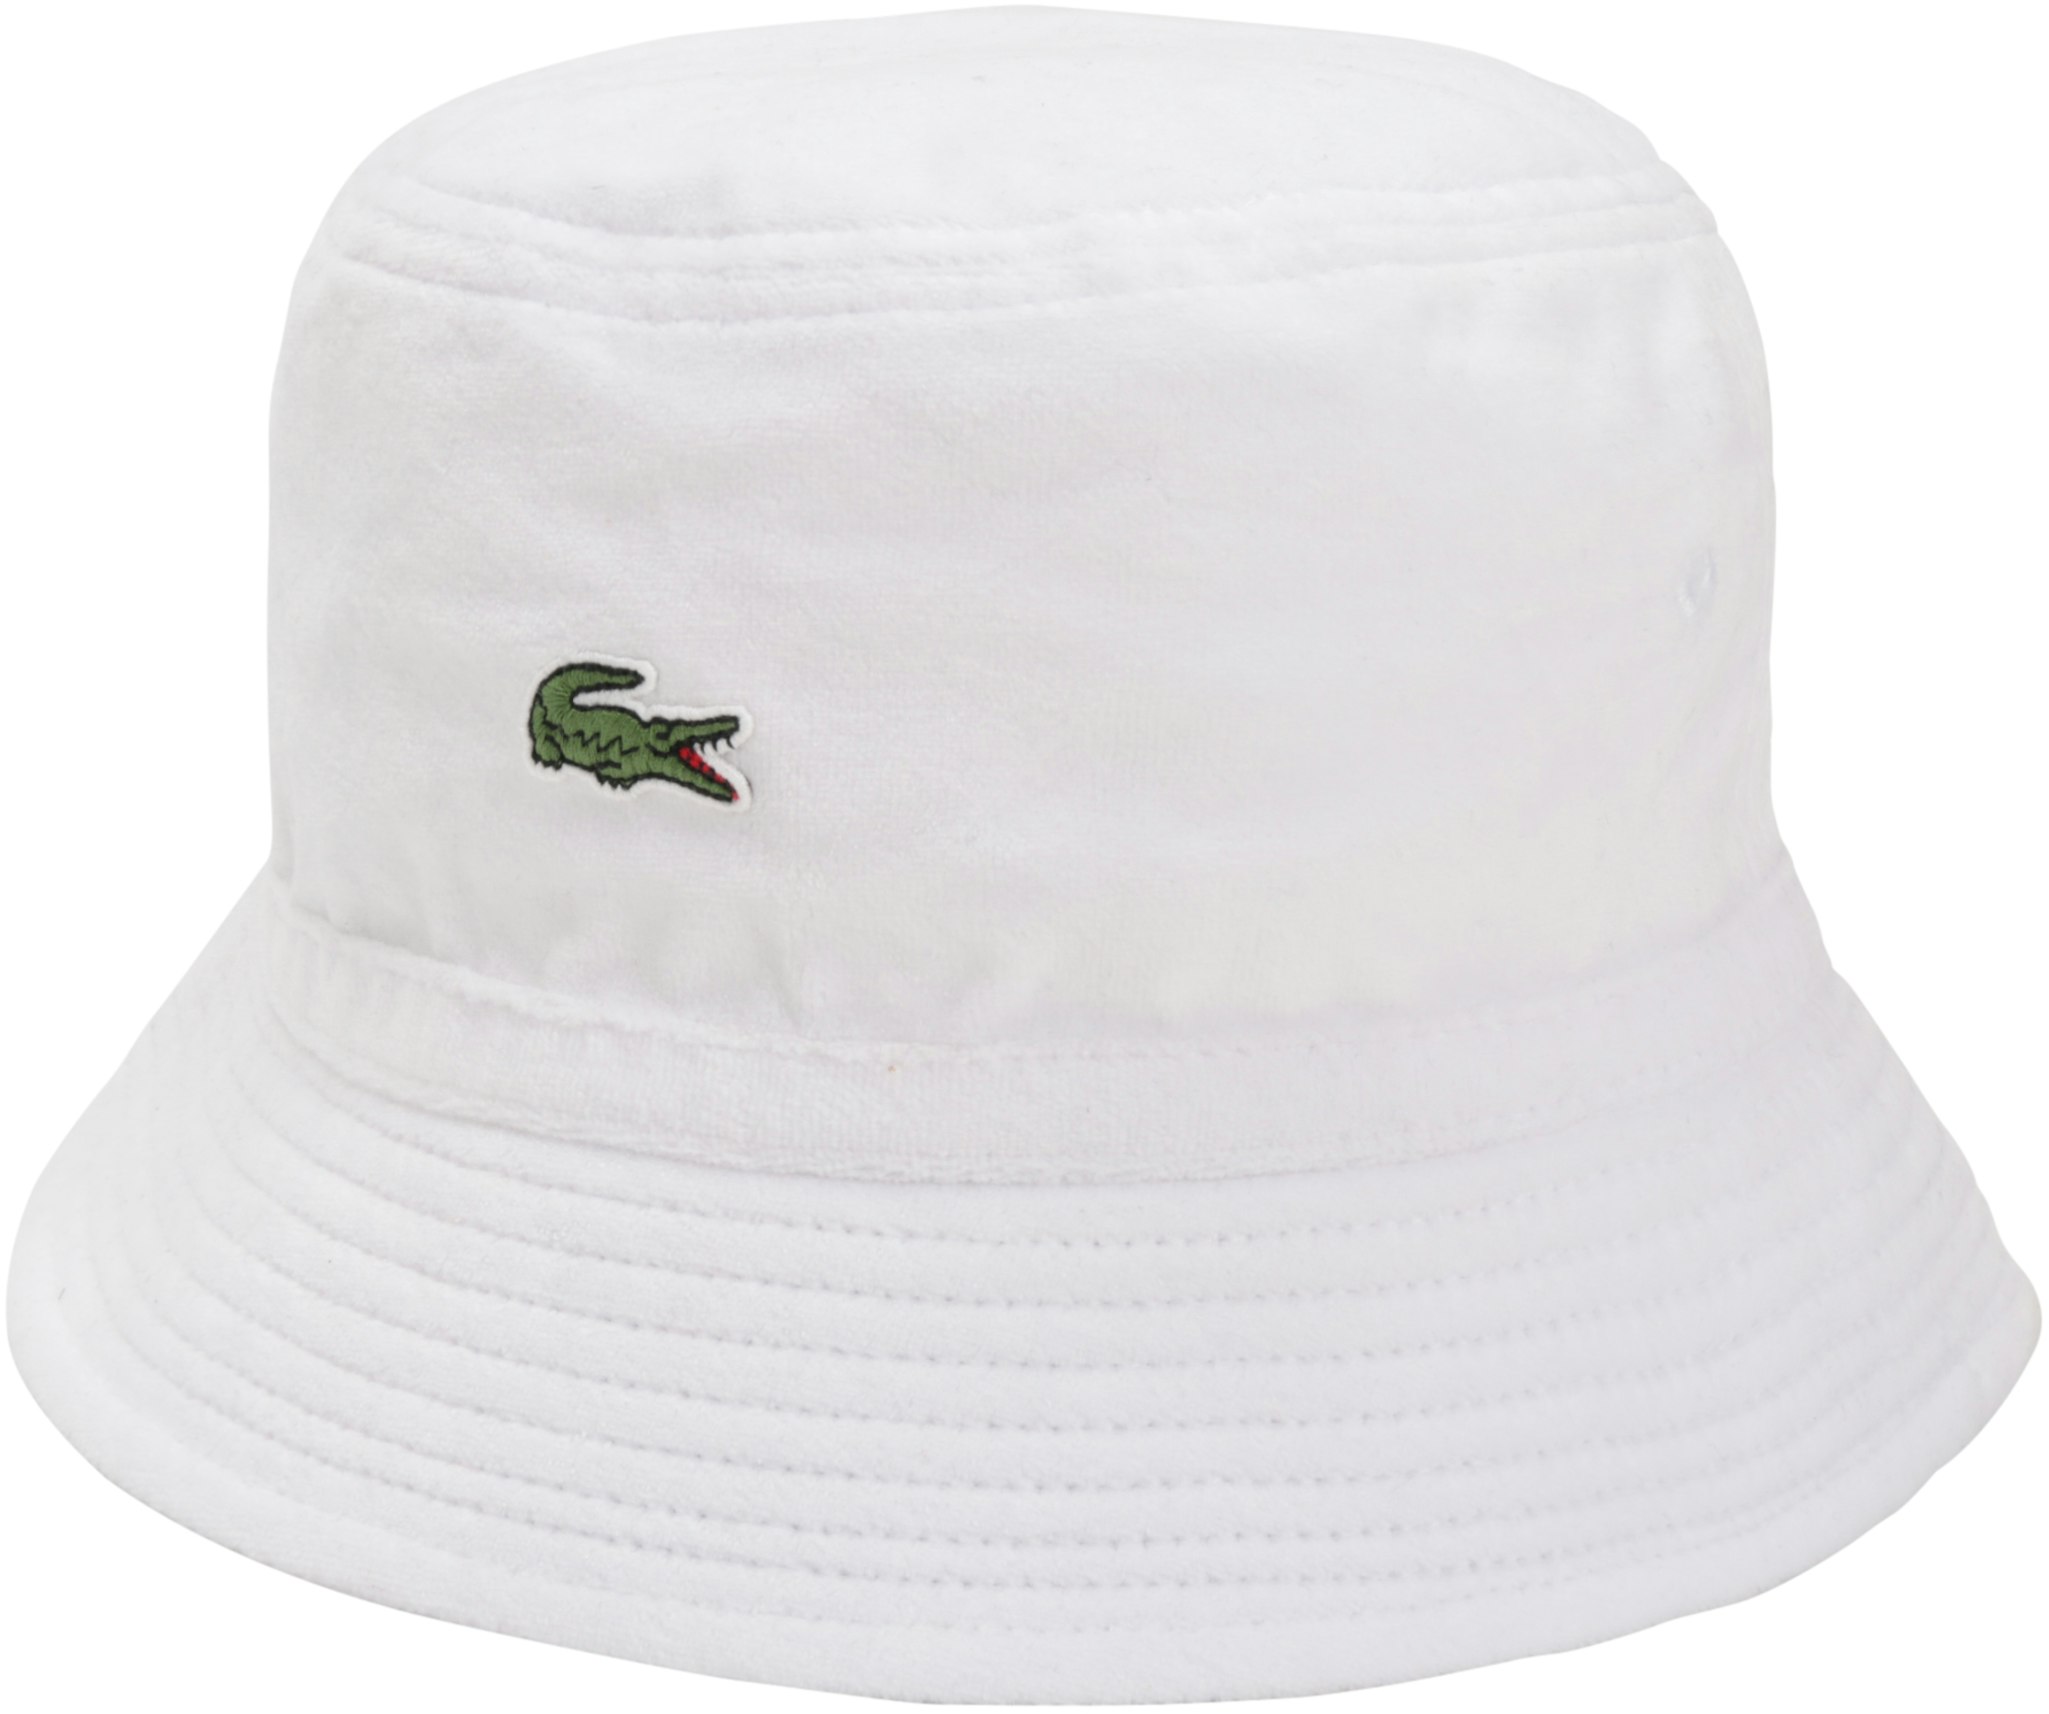 strubehoved Banquet voks Supreme LACOSTE Velour Crusher White - SS18 - US